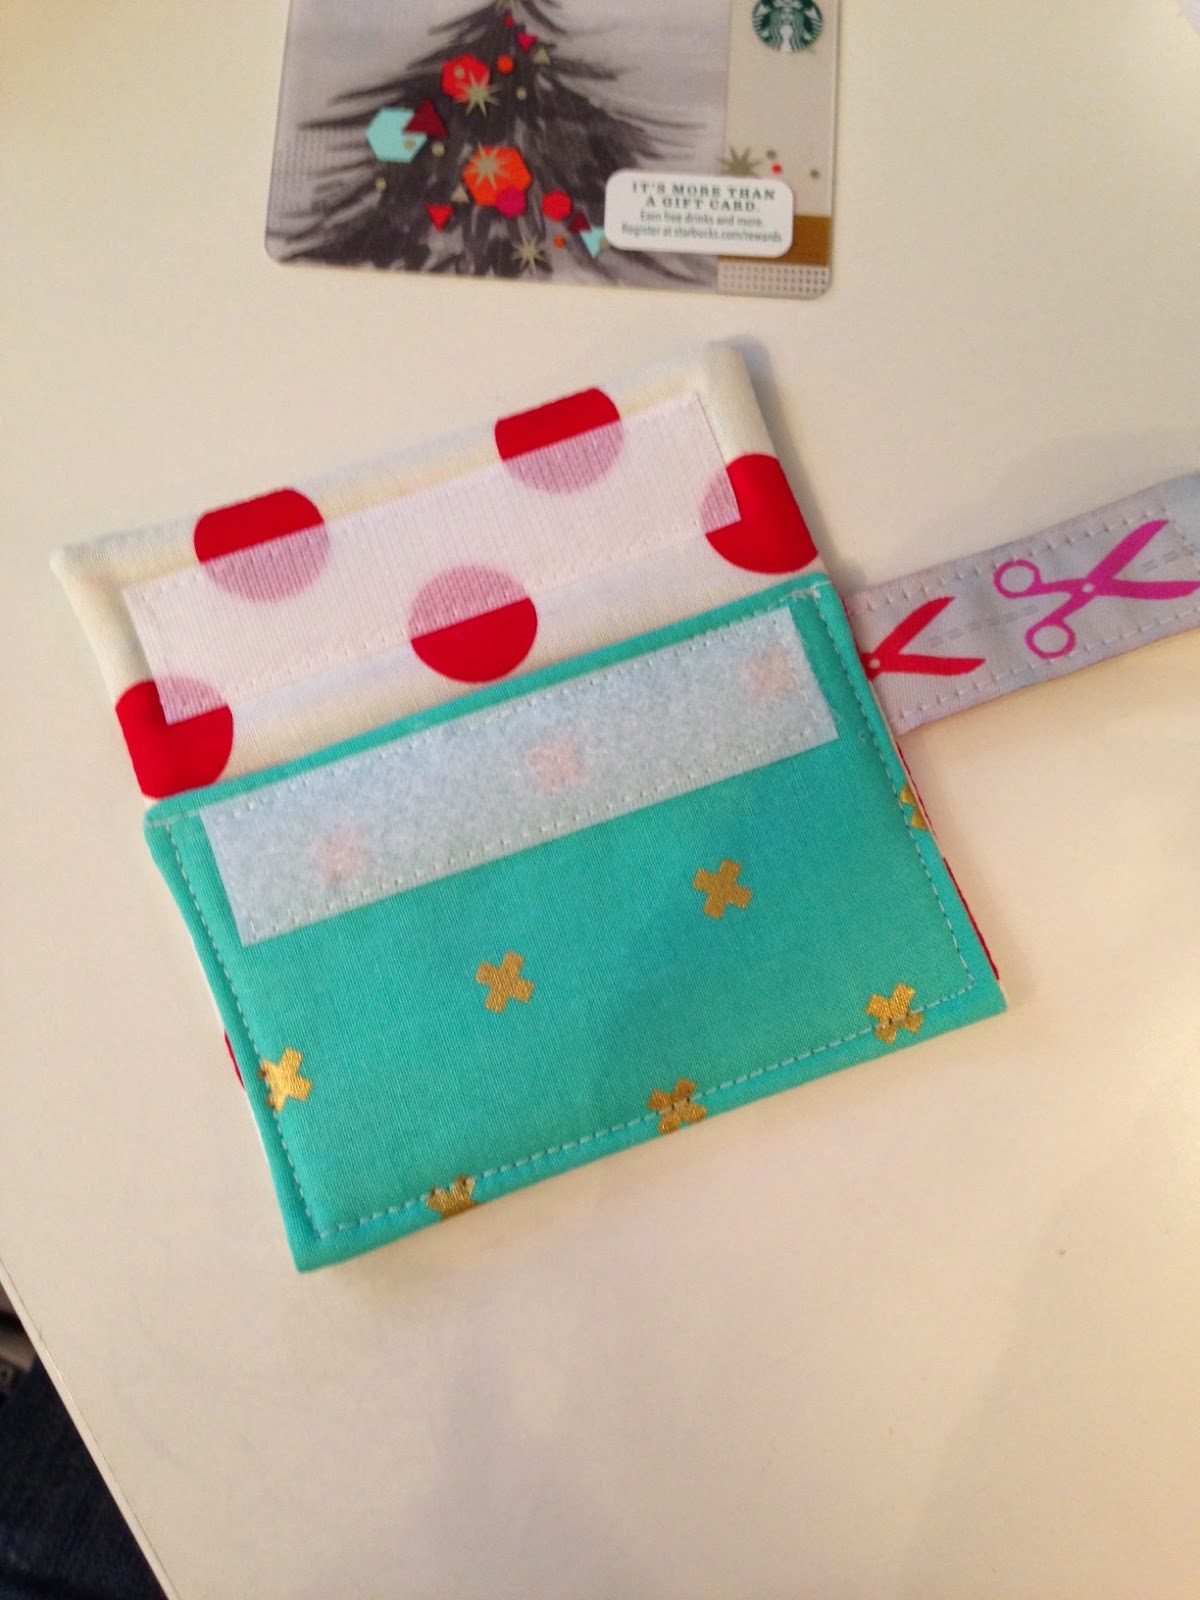 Little Bit Funky: 20 minute crafter {giftcard holder/wallet}